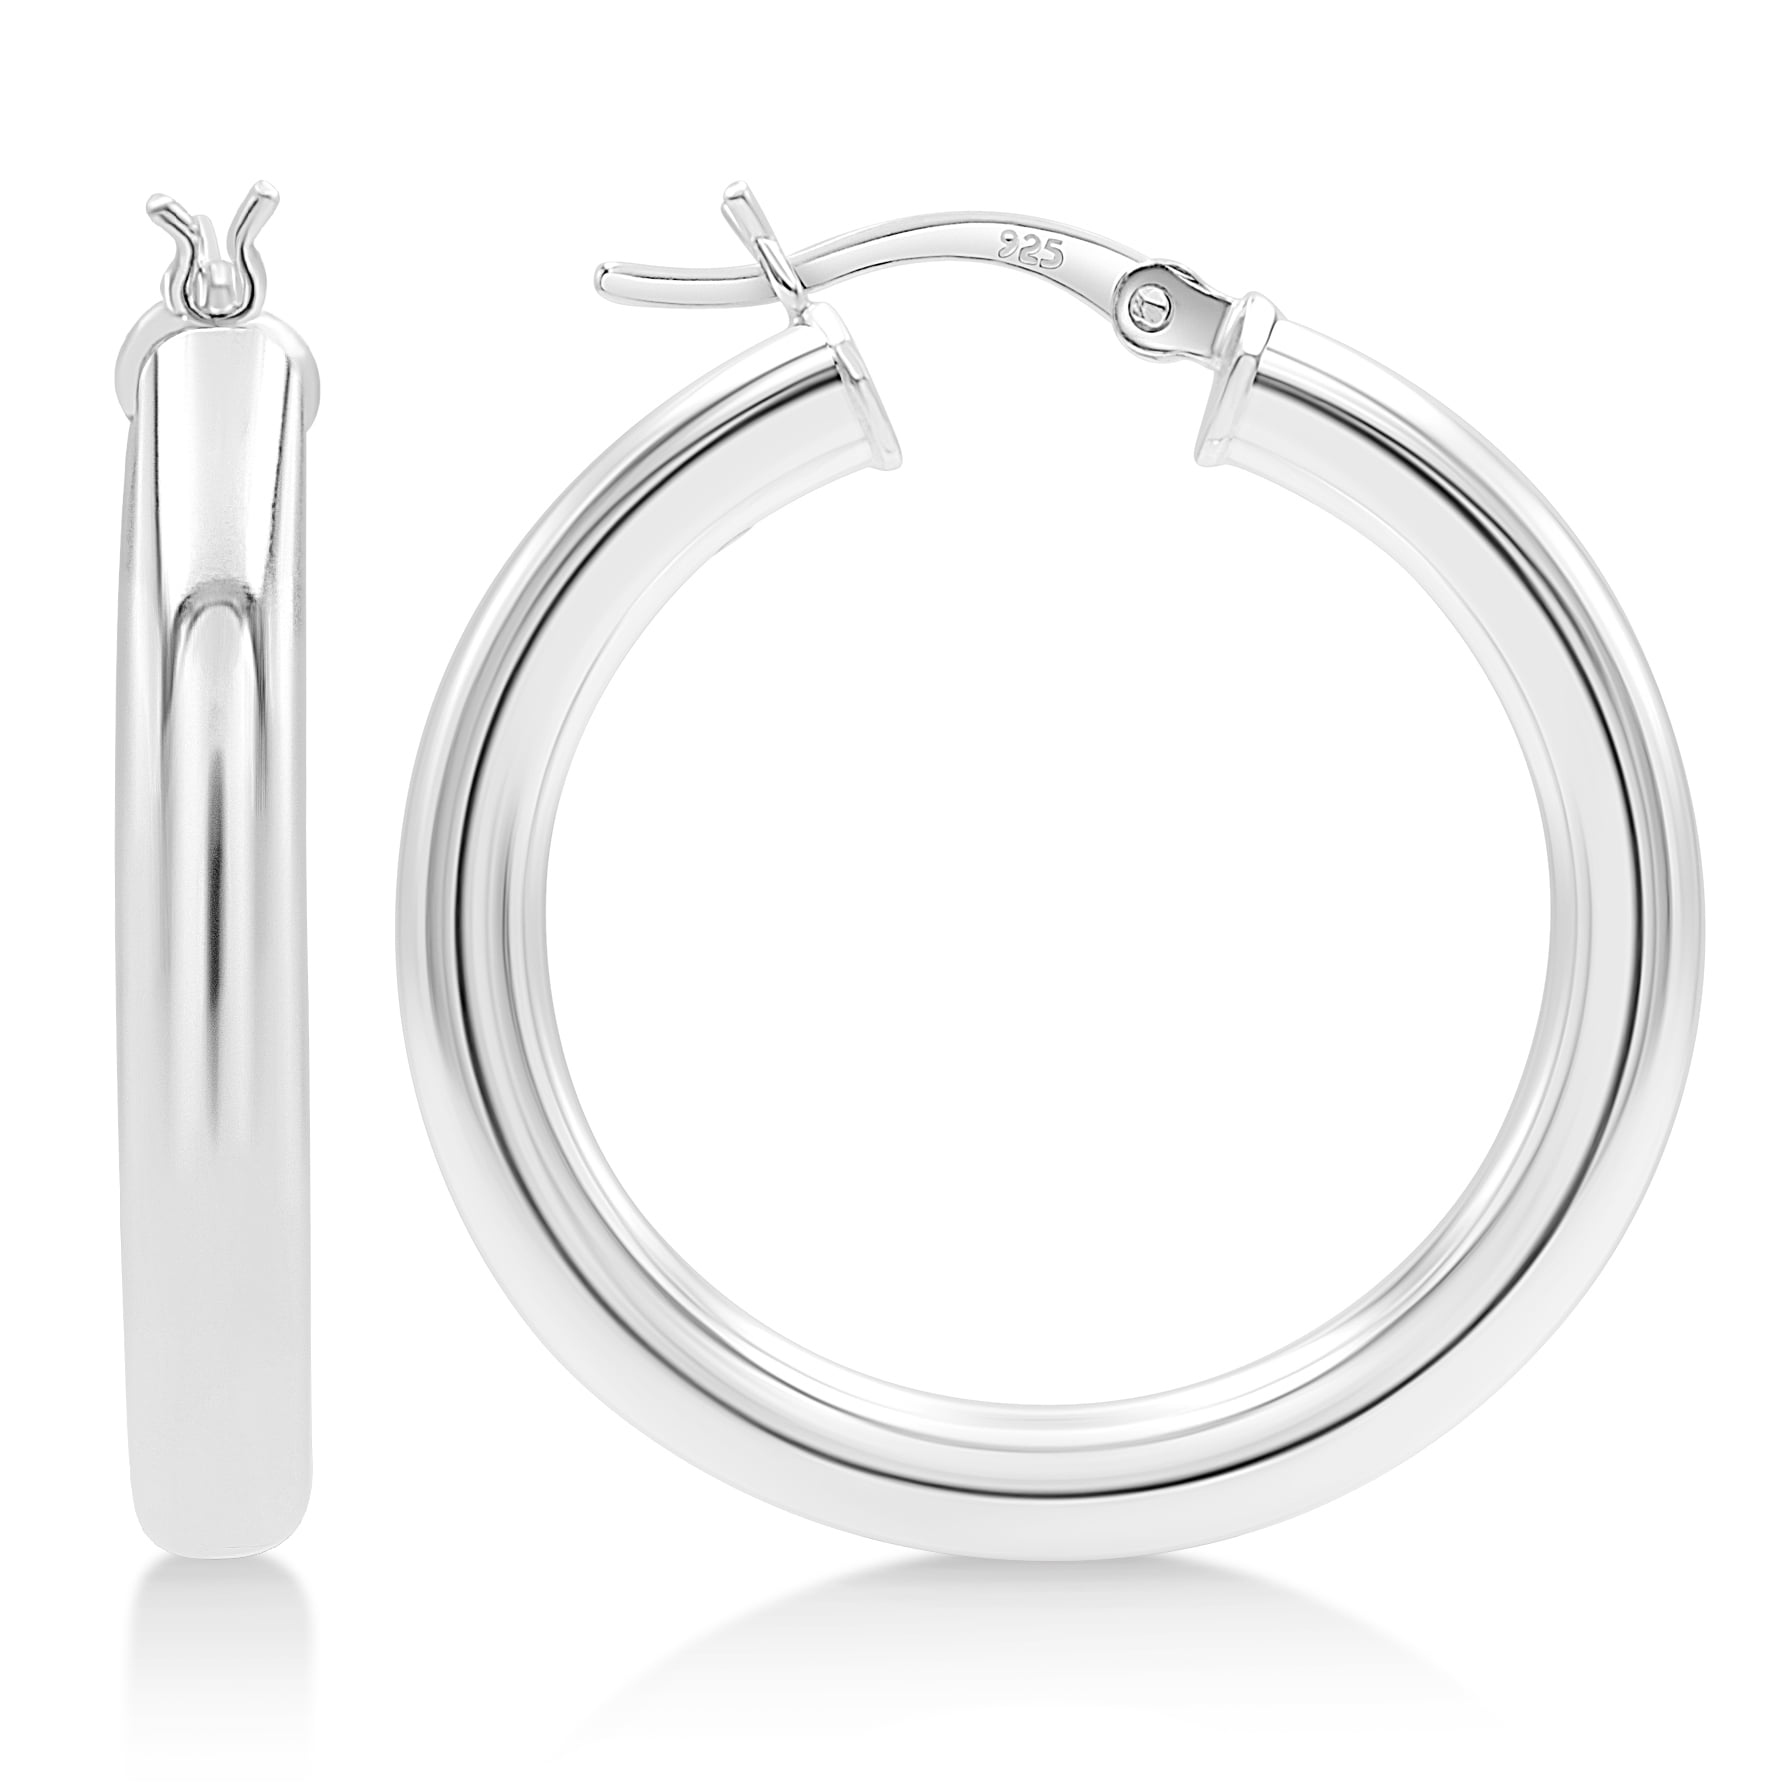 Sterling Silver Textured Hollow Oval Hoop Earrings and a pair of 4mm CZ Stud Earrings 